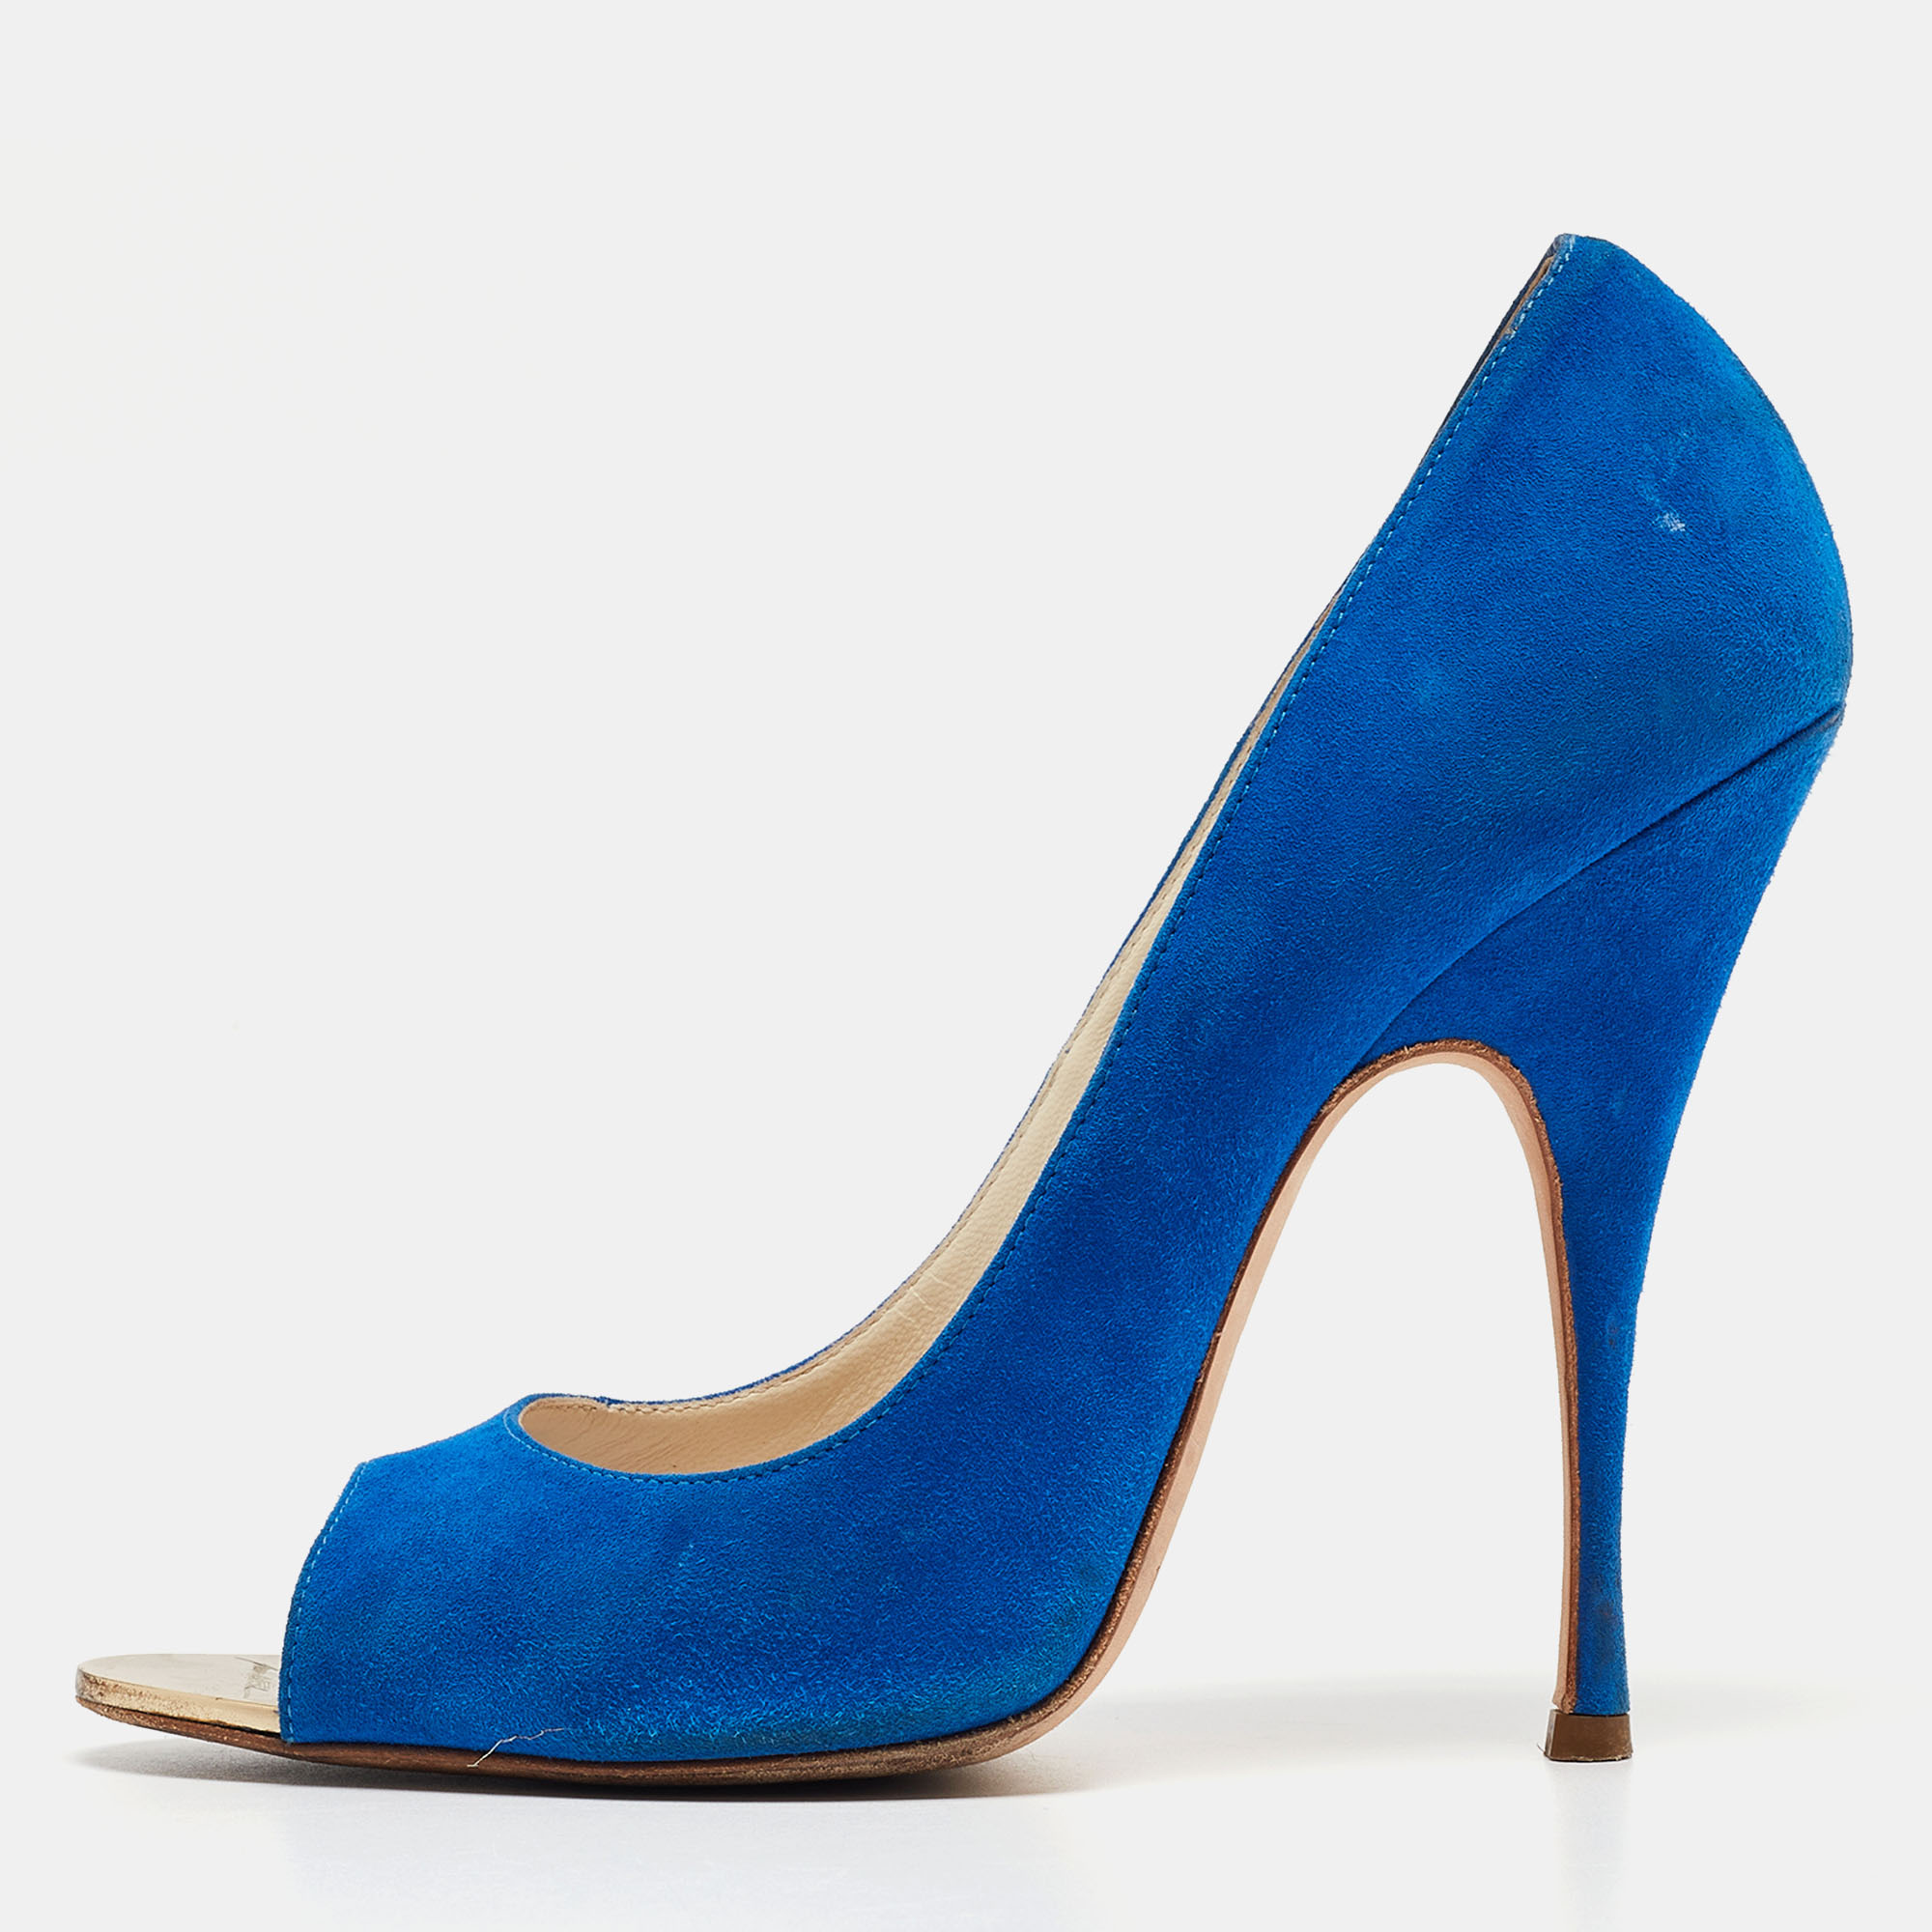 Brian atwood royal blue suede open-toe pumps size 38.5